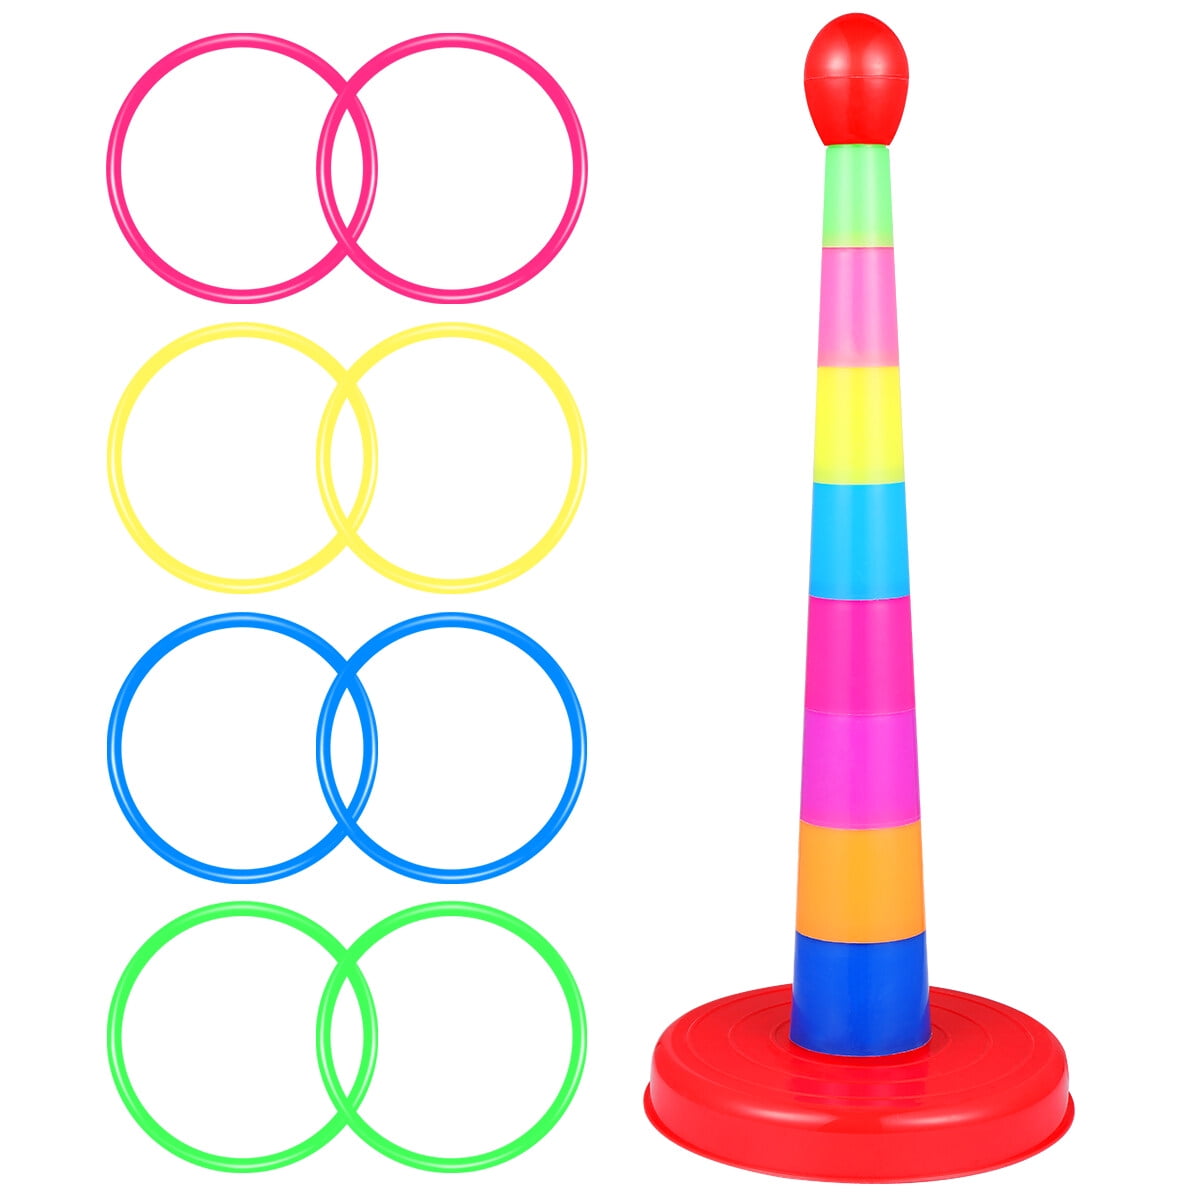 Buy Tbest 5Pcs Jumping Rings, Kids Jump Rings Game Children Jumping Game  Playing Activity for Children Children's Outdoor Entertainment Supplies  Hopscotch Rings Poly Hopscotch Hopscotch Rings Online at Lowest Price Ever  in